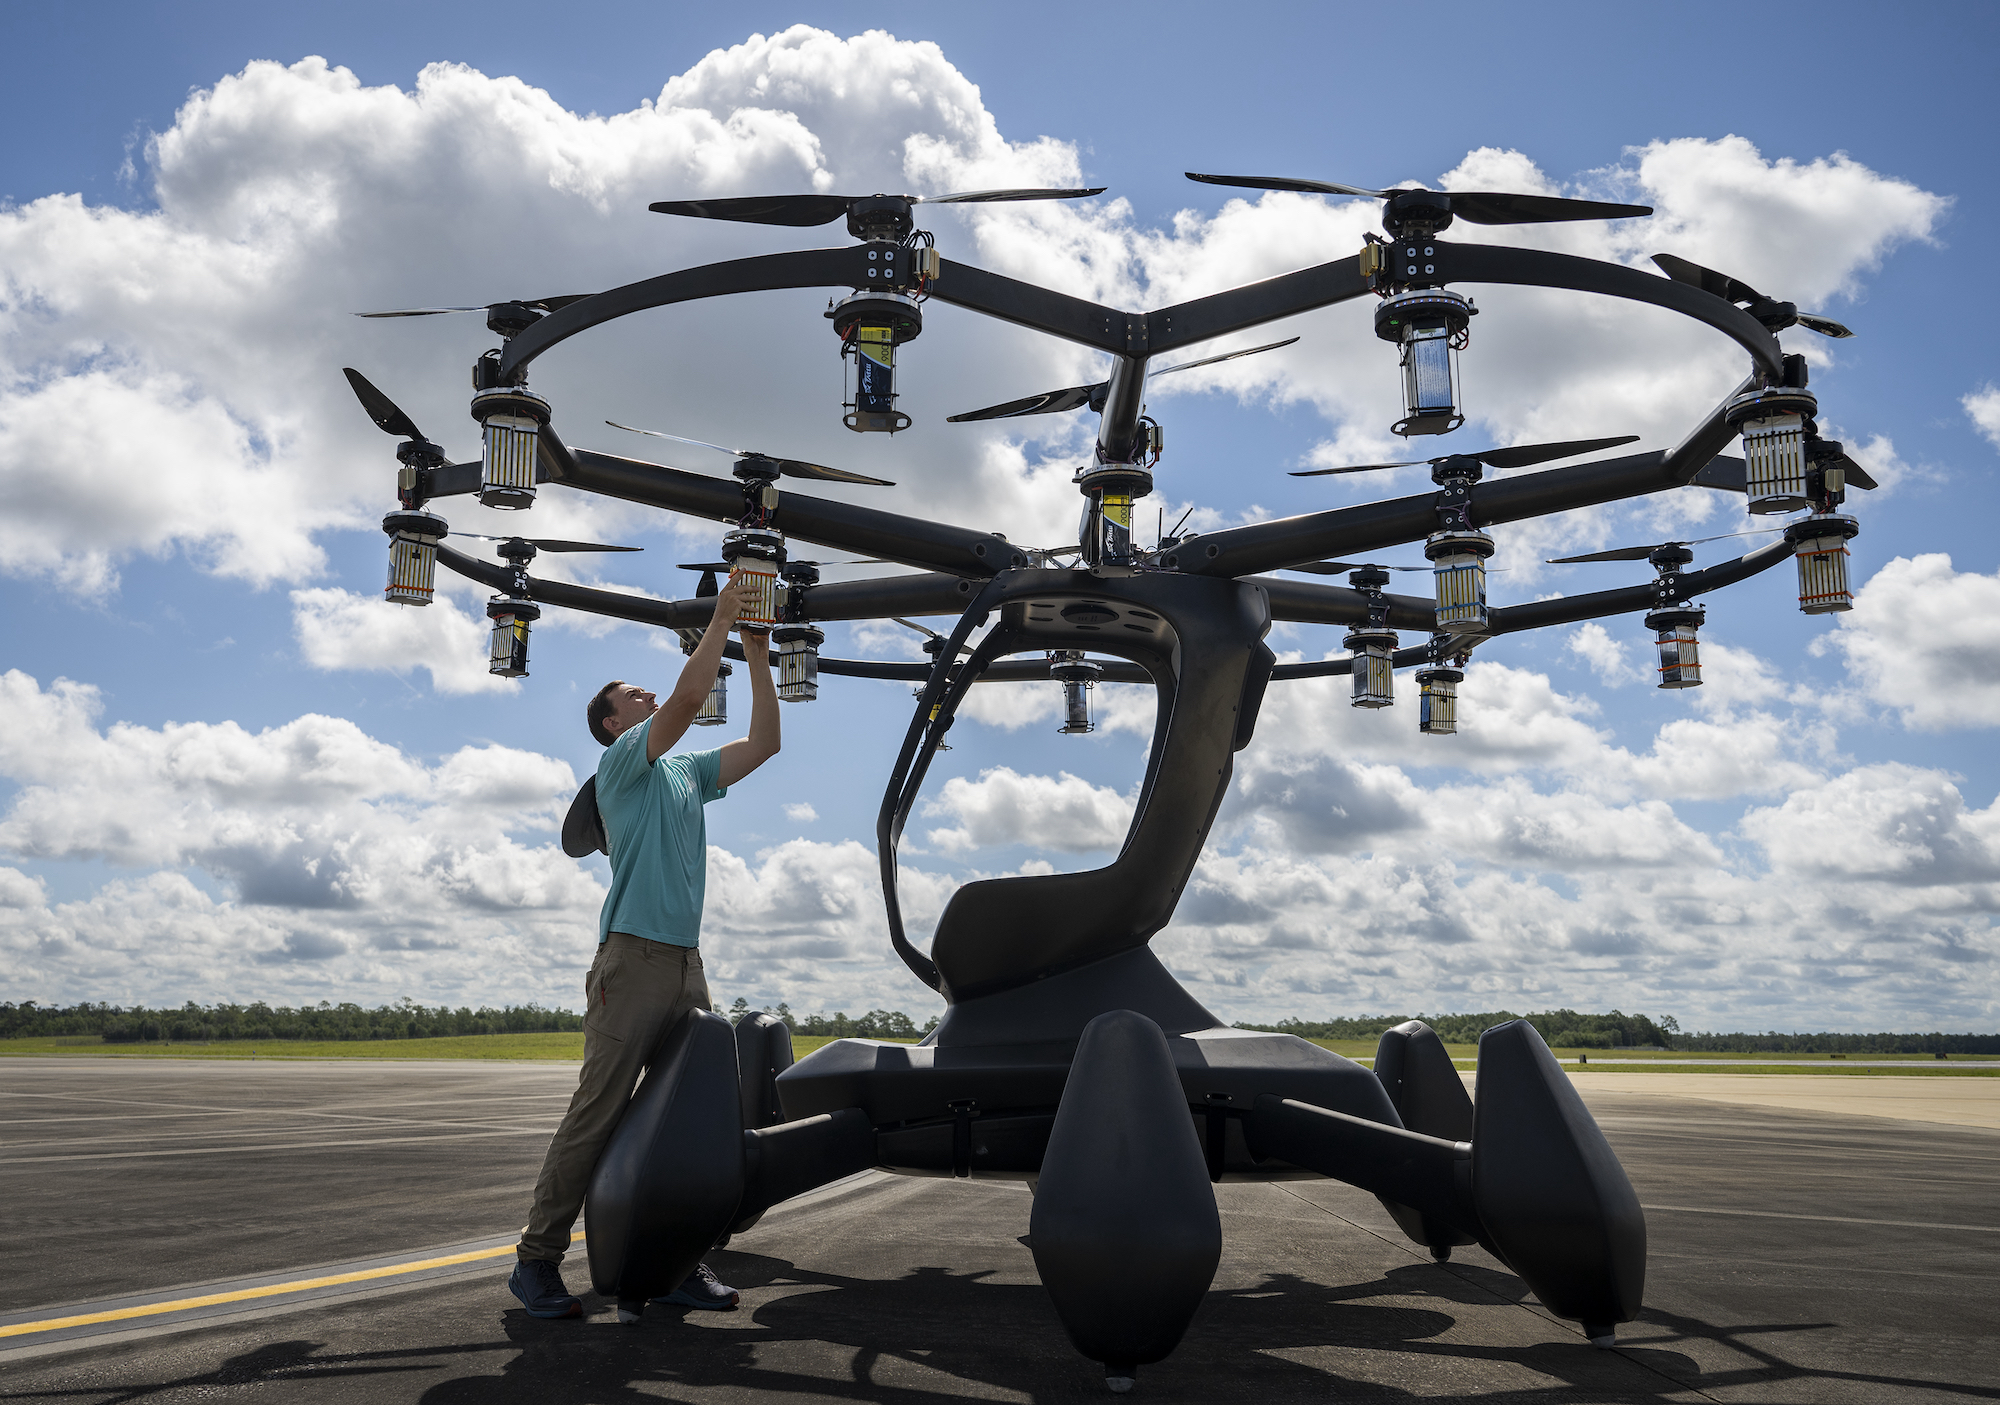 With 18 rotors, the Hexa aircraft has room for just one passenger